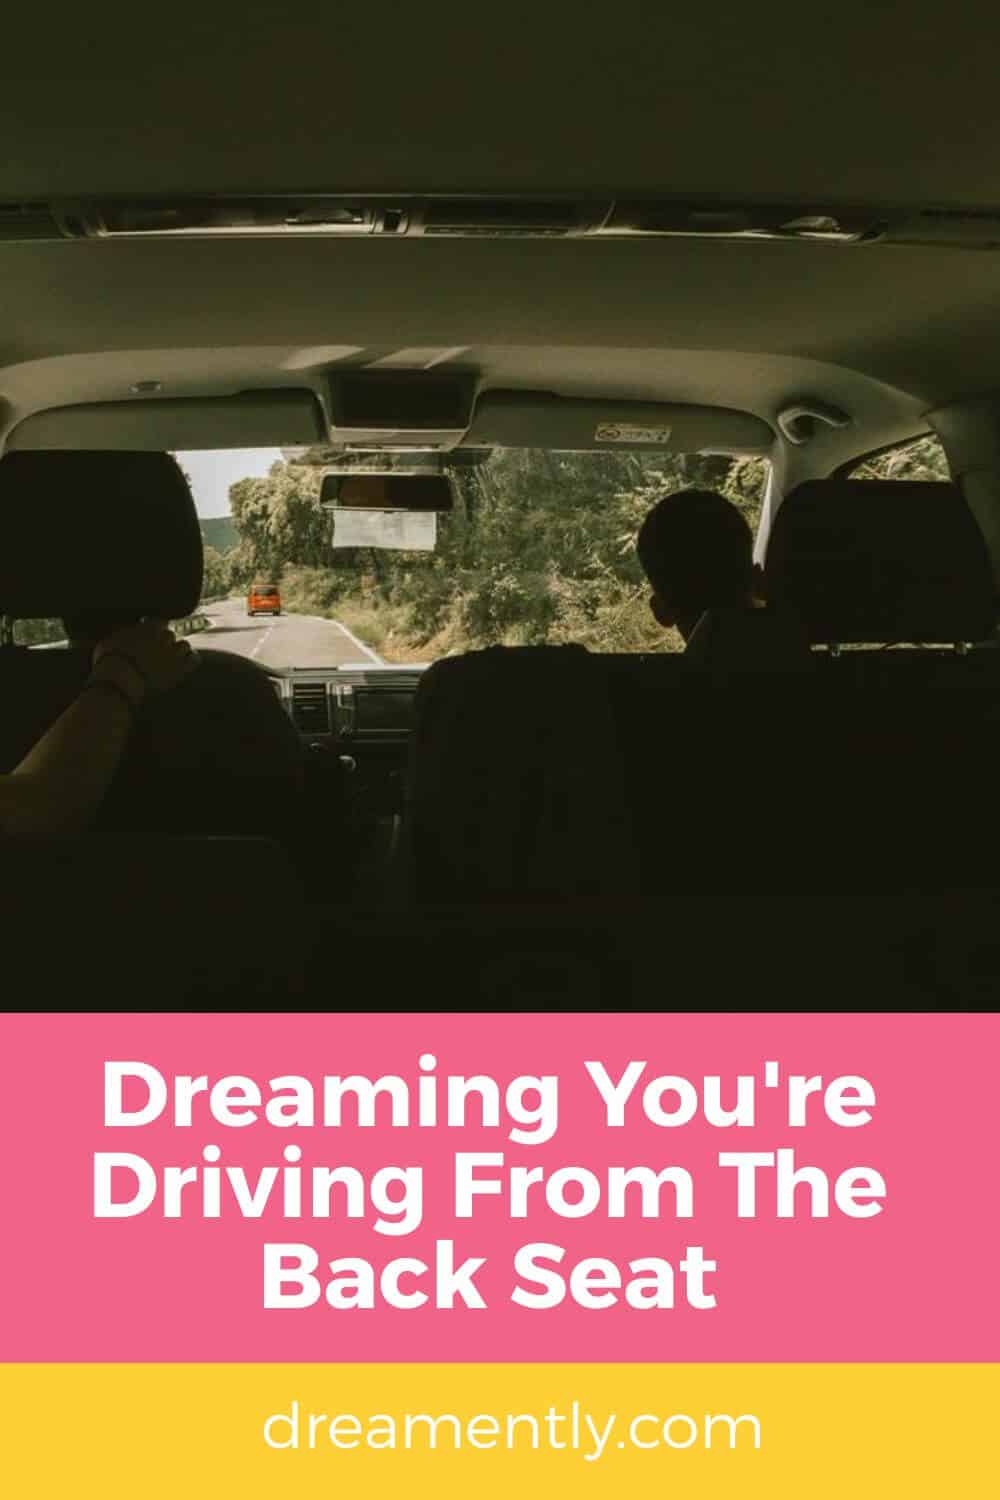 Dreaming You're Driving From The Back Seat (1)